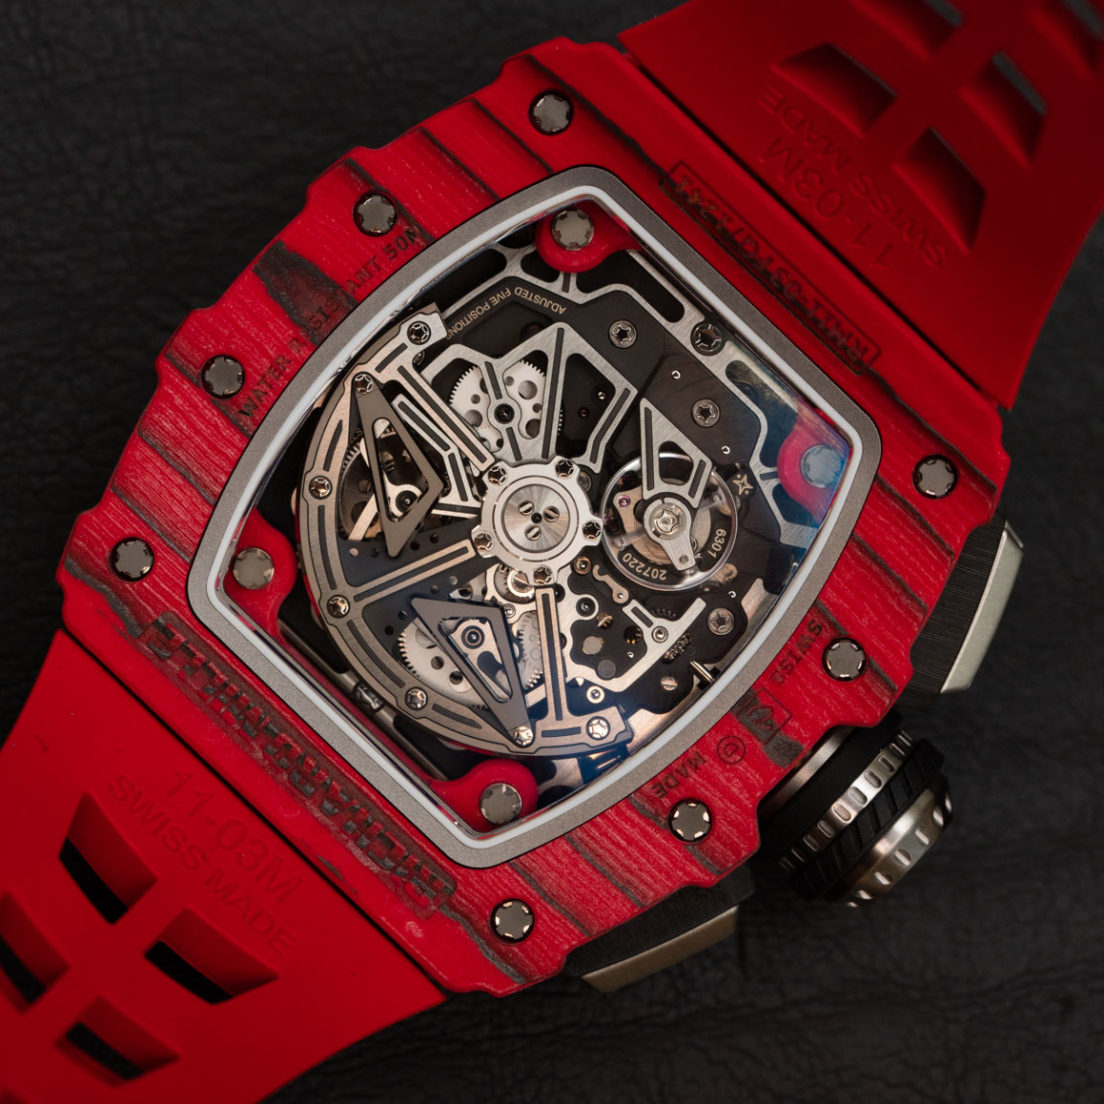 Richard Mille RM 11-03 Automatic Flyback Chronograph Red Quartz FQ TPT ...